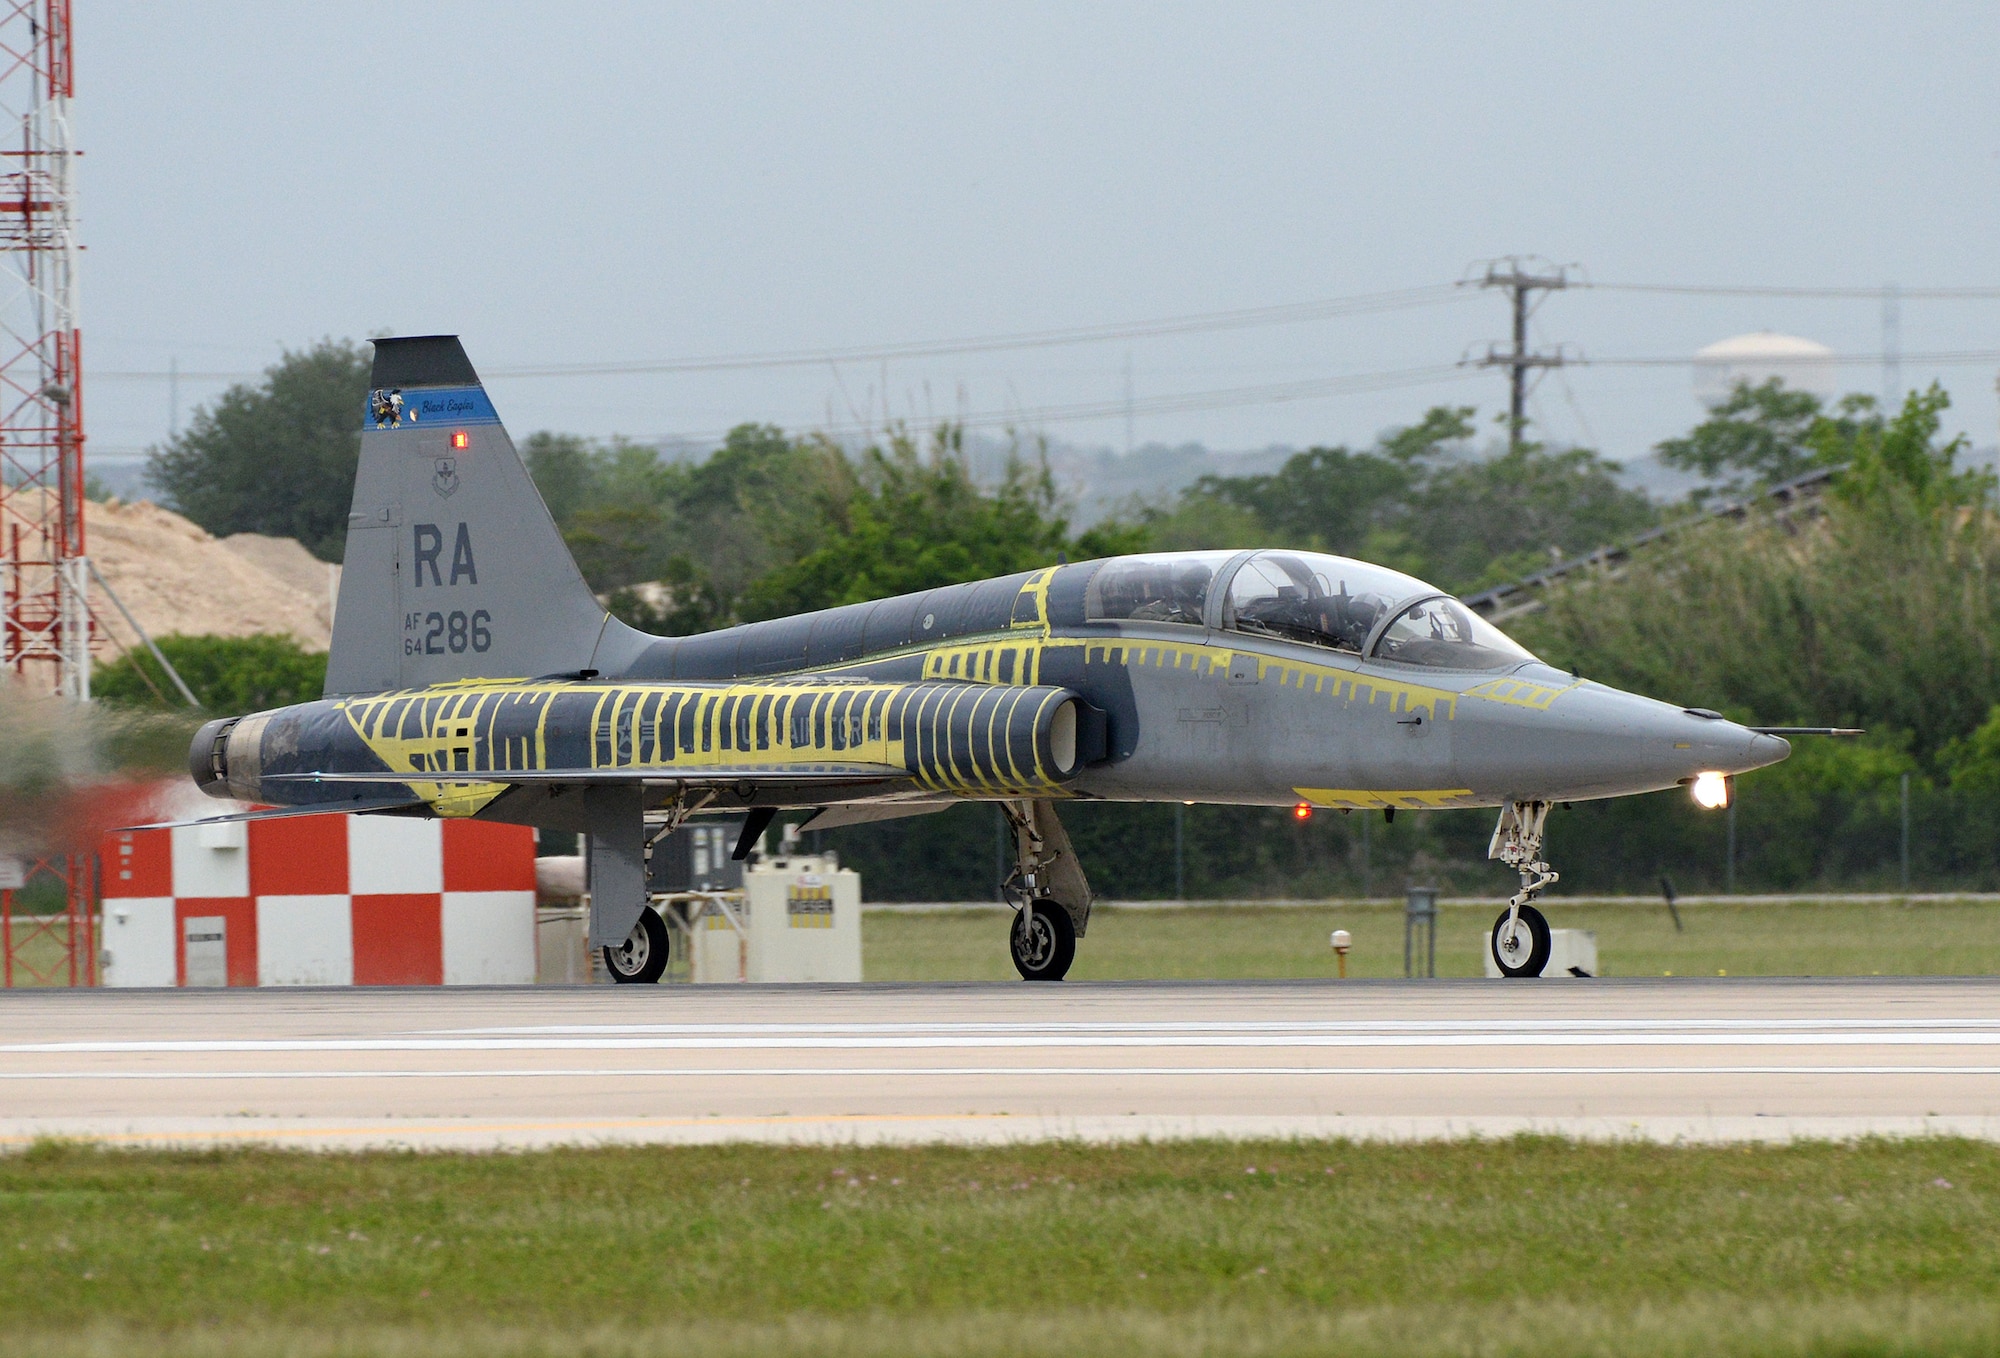 T-38C Talon Instructor Pilot (front), Lt. Col Edward Stapanon III, and Combat Systems Officer (rear), Maj. Brion Nielsen, begin their take-off roll for a training mission April 18, 2018, at Joint Base San Antonio-Randolph, Texas. The aircraft recently completed the Pacer Classic III modification package and still shows its distinctive tiger stripes that will be removed when the aircraft receives its next scheduled complete paint job. (U.S. Air Force photo by Alex R. Lloyd)